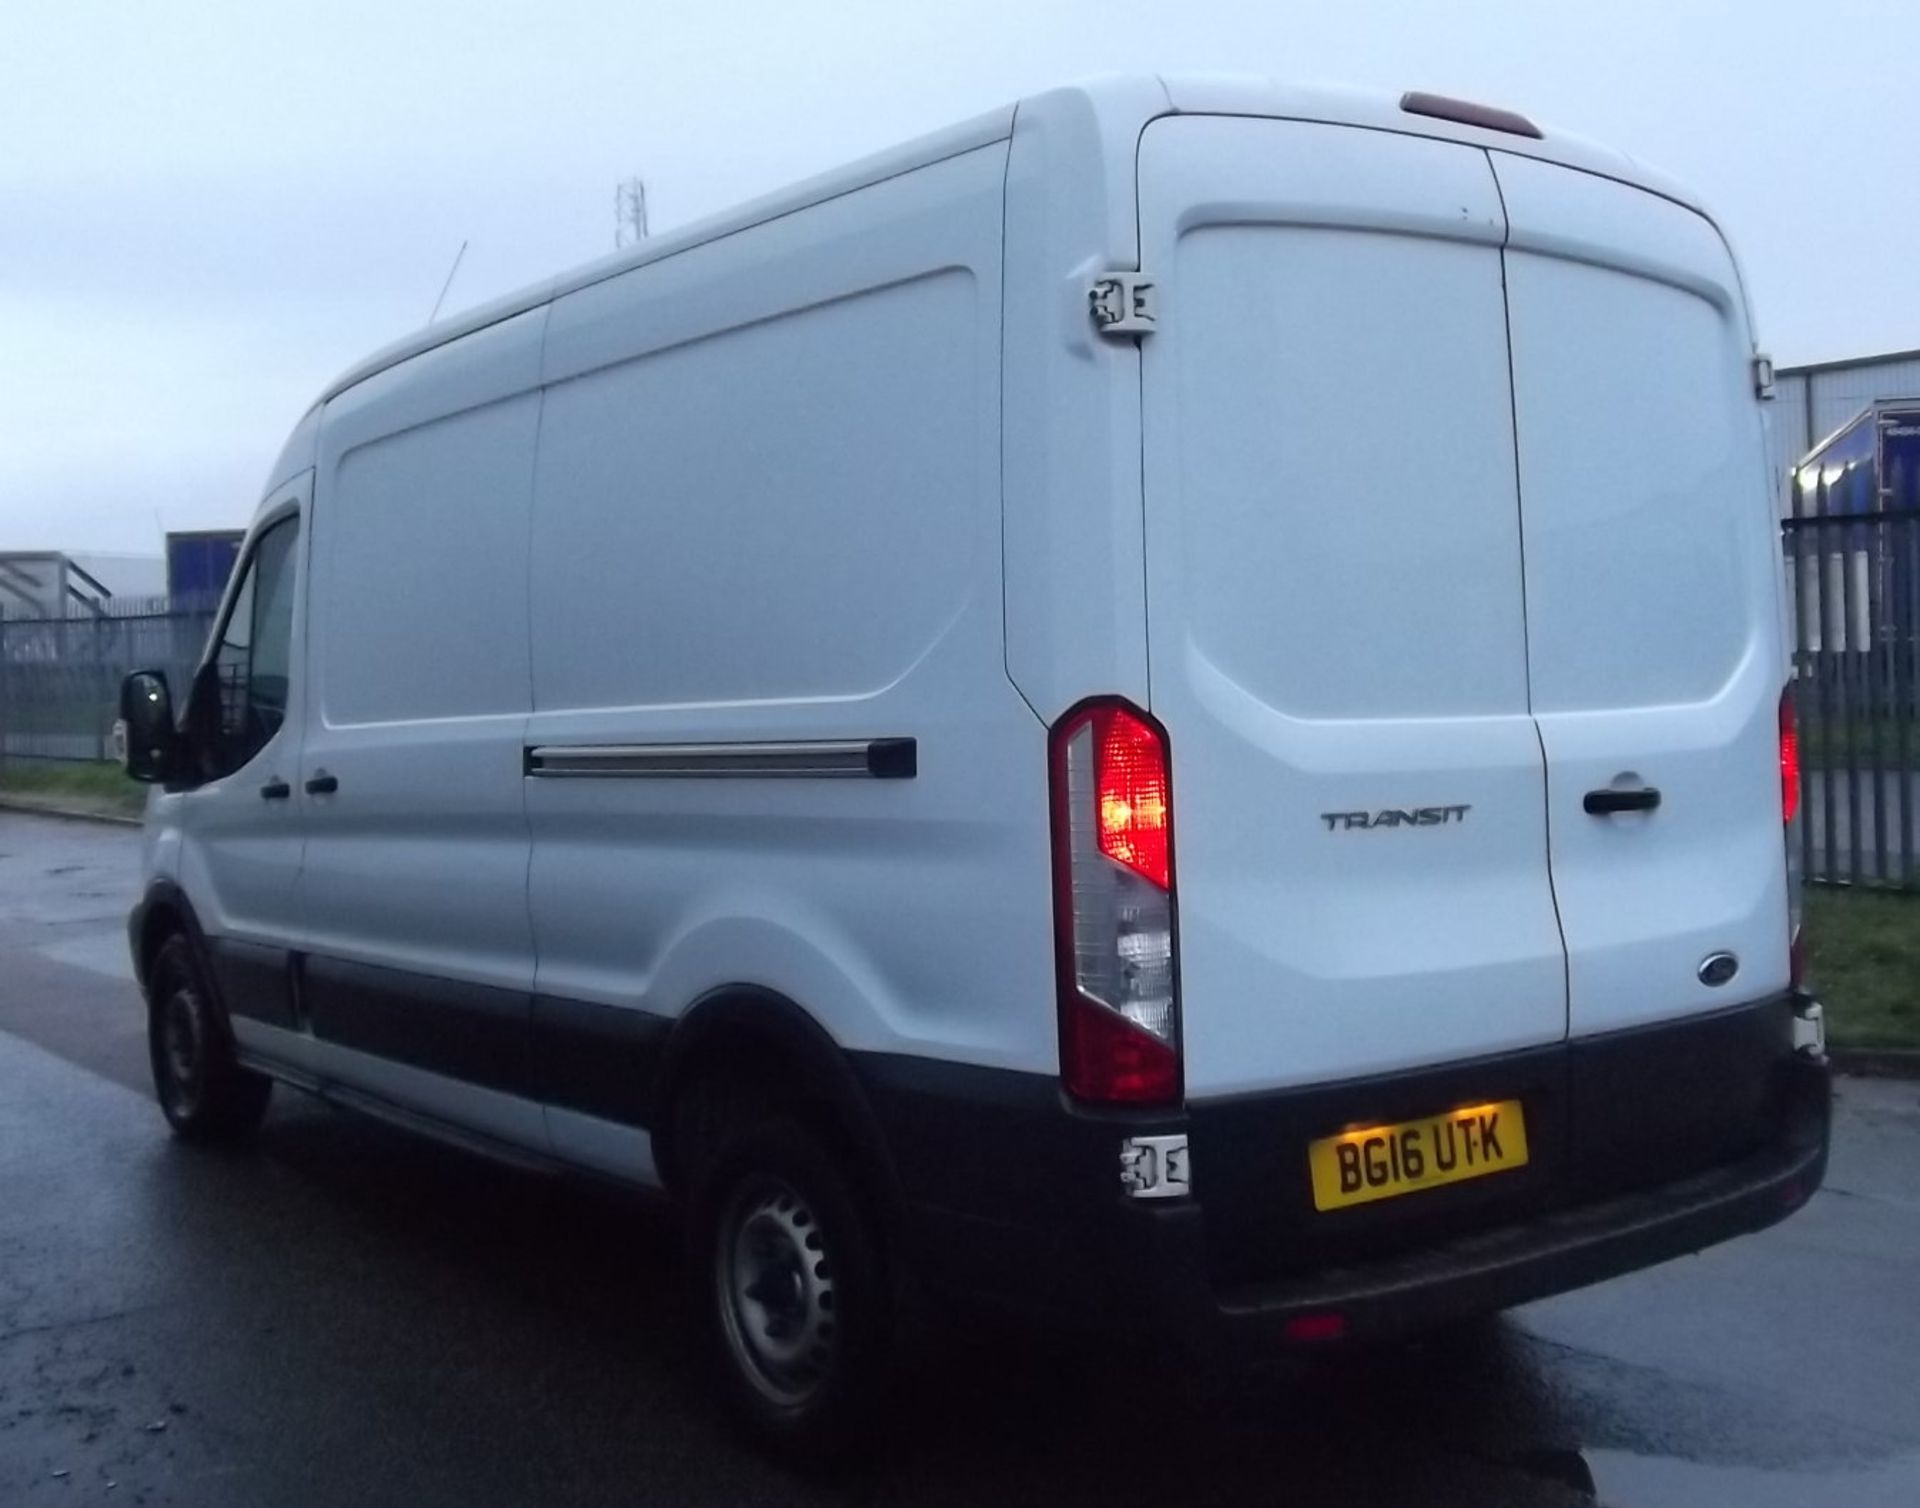 2016 Ford Transit 350 2.2 TDCi 125ps H2 Panel Van - CL505 - Location: Corby, Northamptonshire - Image 2 of 15